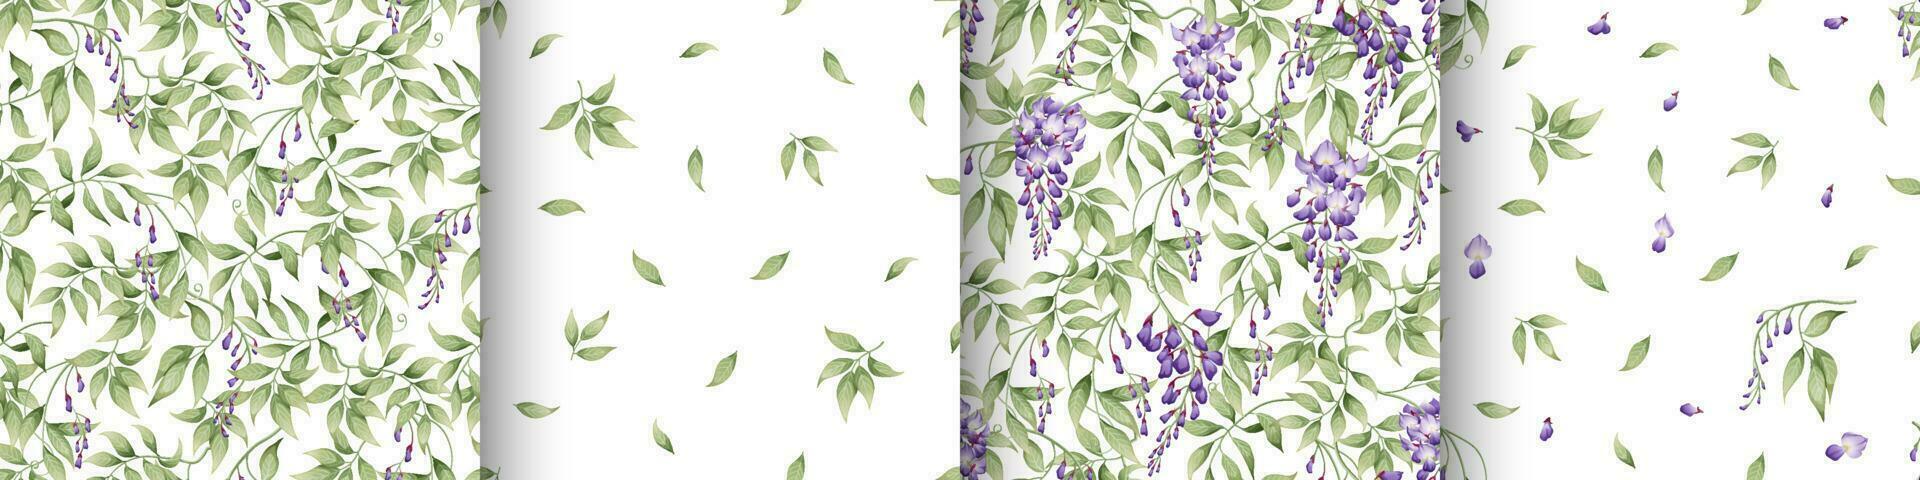 Set of seamless patterns with purple wisteria and green leaves on a white background. Texture in Asian style. Suitable for fabric, paper, textile, wallpaper vector